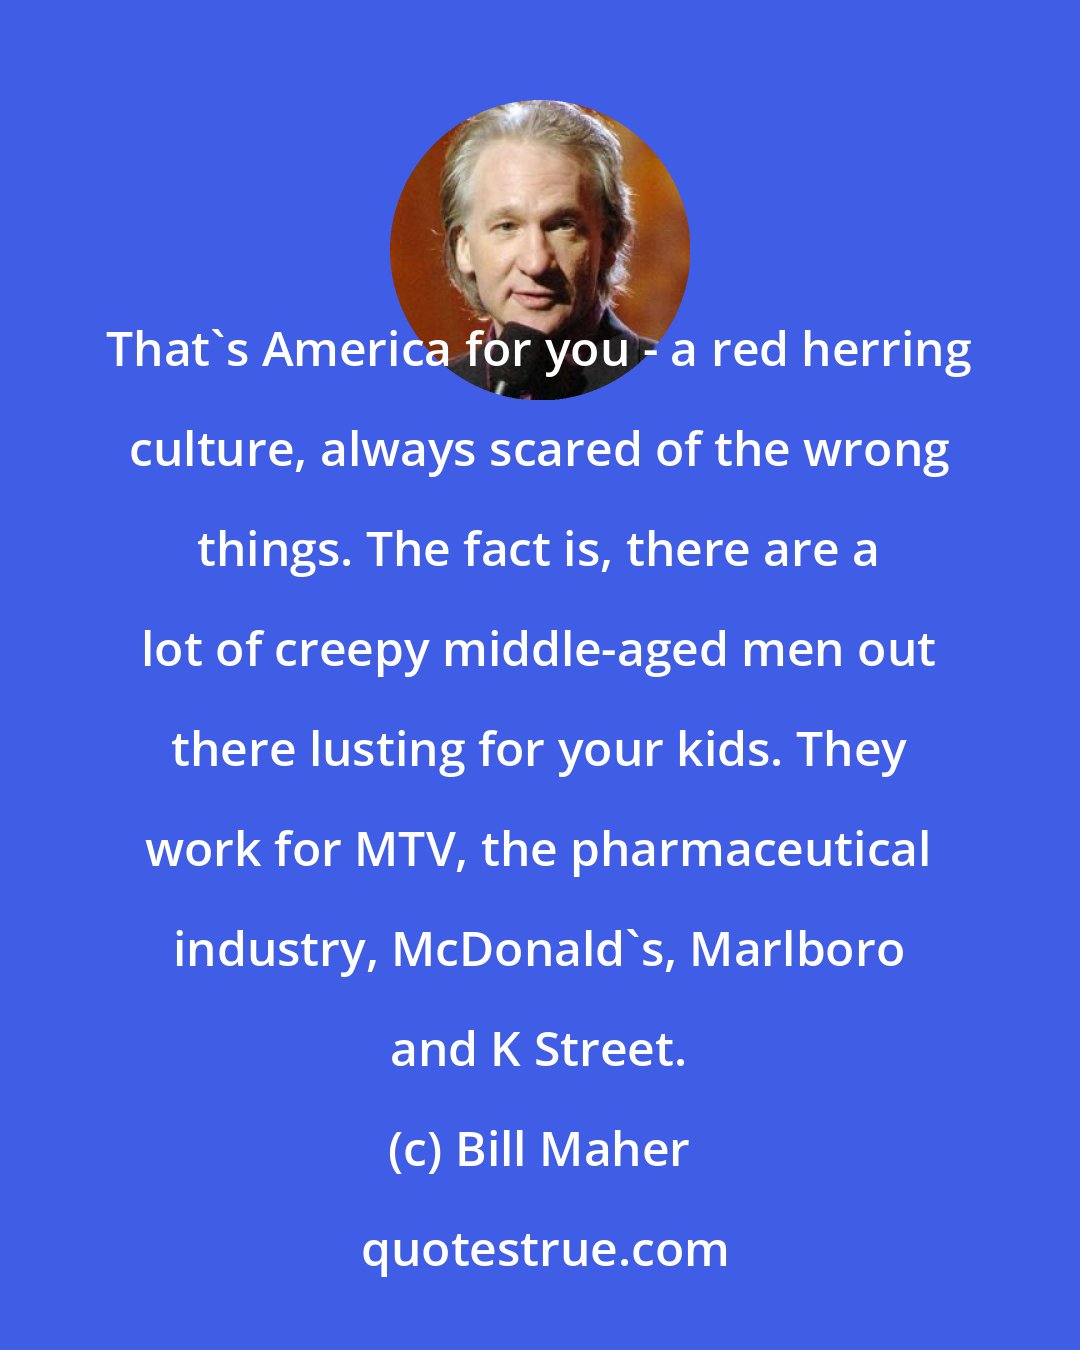 Bill Maher: That's America for you - a red herring culture, always scared of the wrong things. The fact is, there are a lot of creepy middle-aged men out there lusting for your kids. They work for MTV, the pharmaceutical industry, McDonald's, Marlboro and K Street.